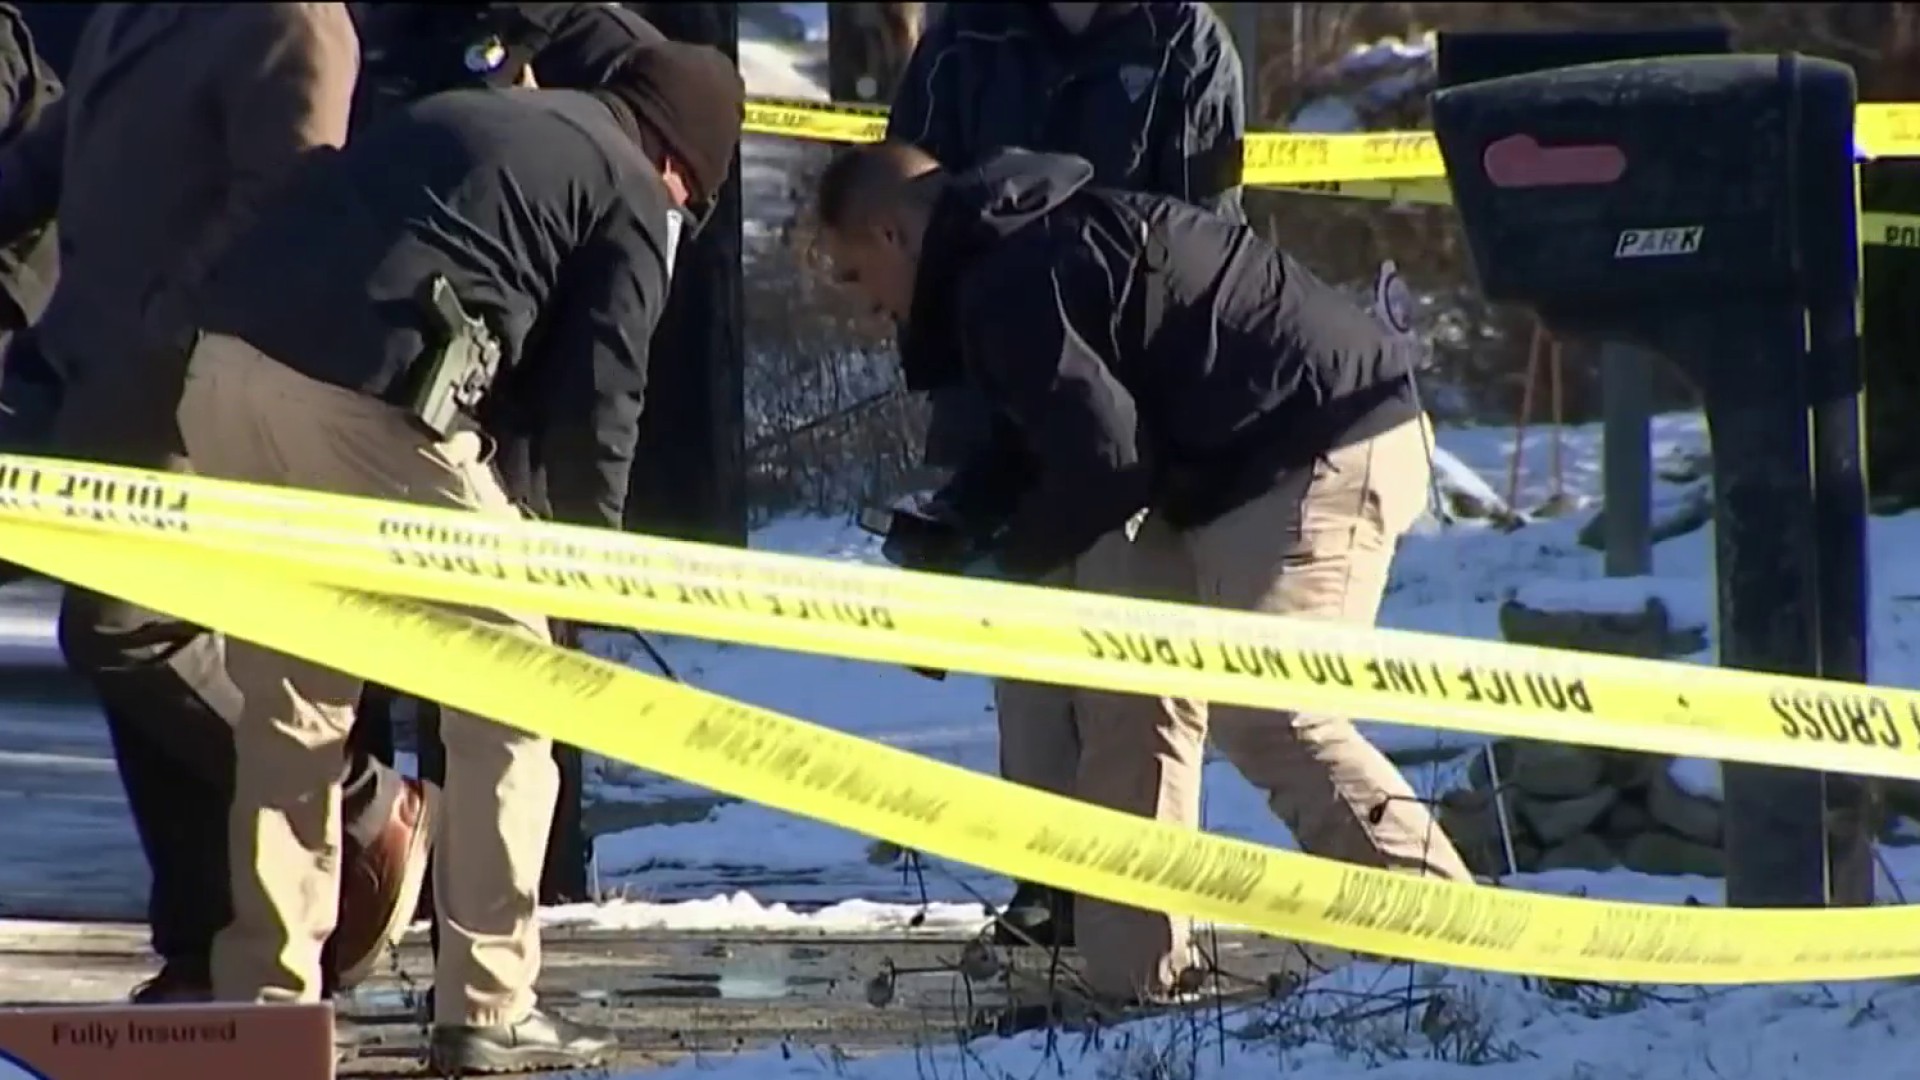 Search Underway in Apparent Homicide Case Out of Stoughton